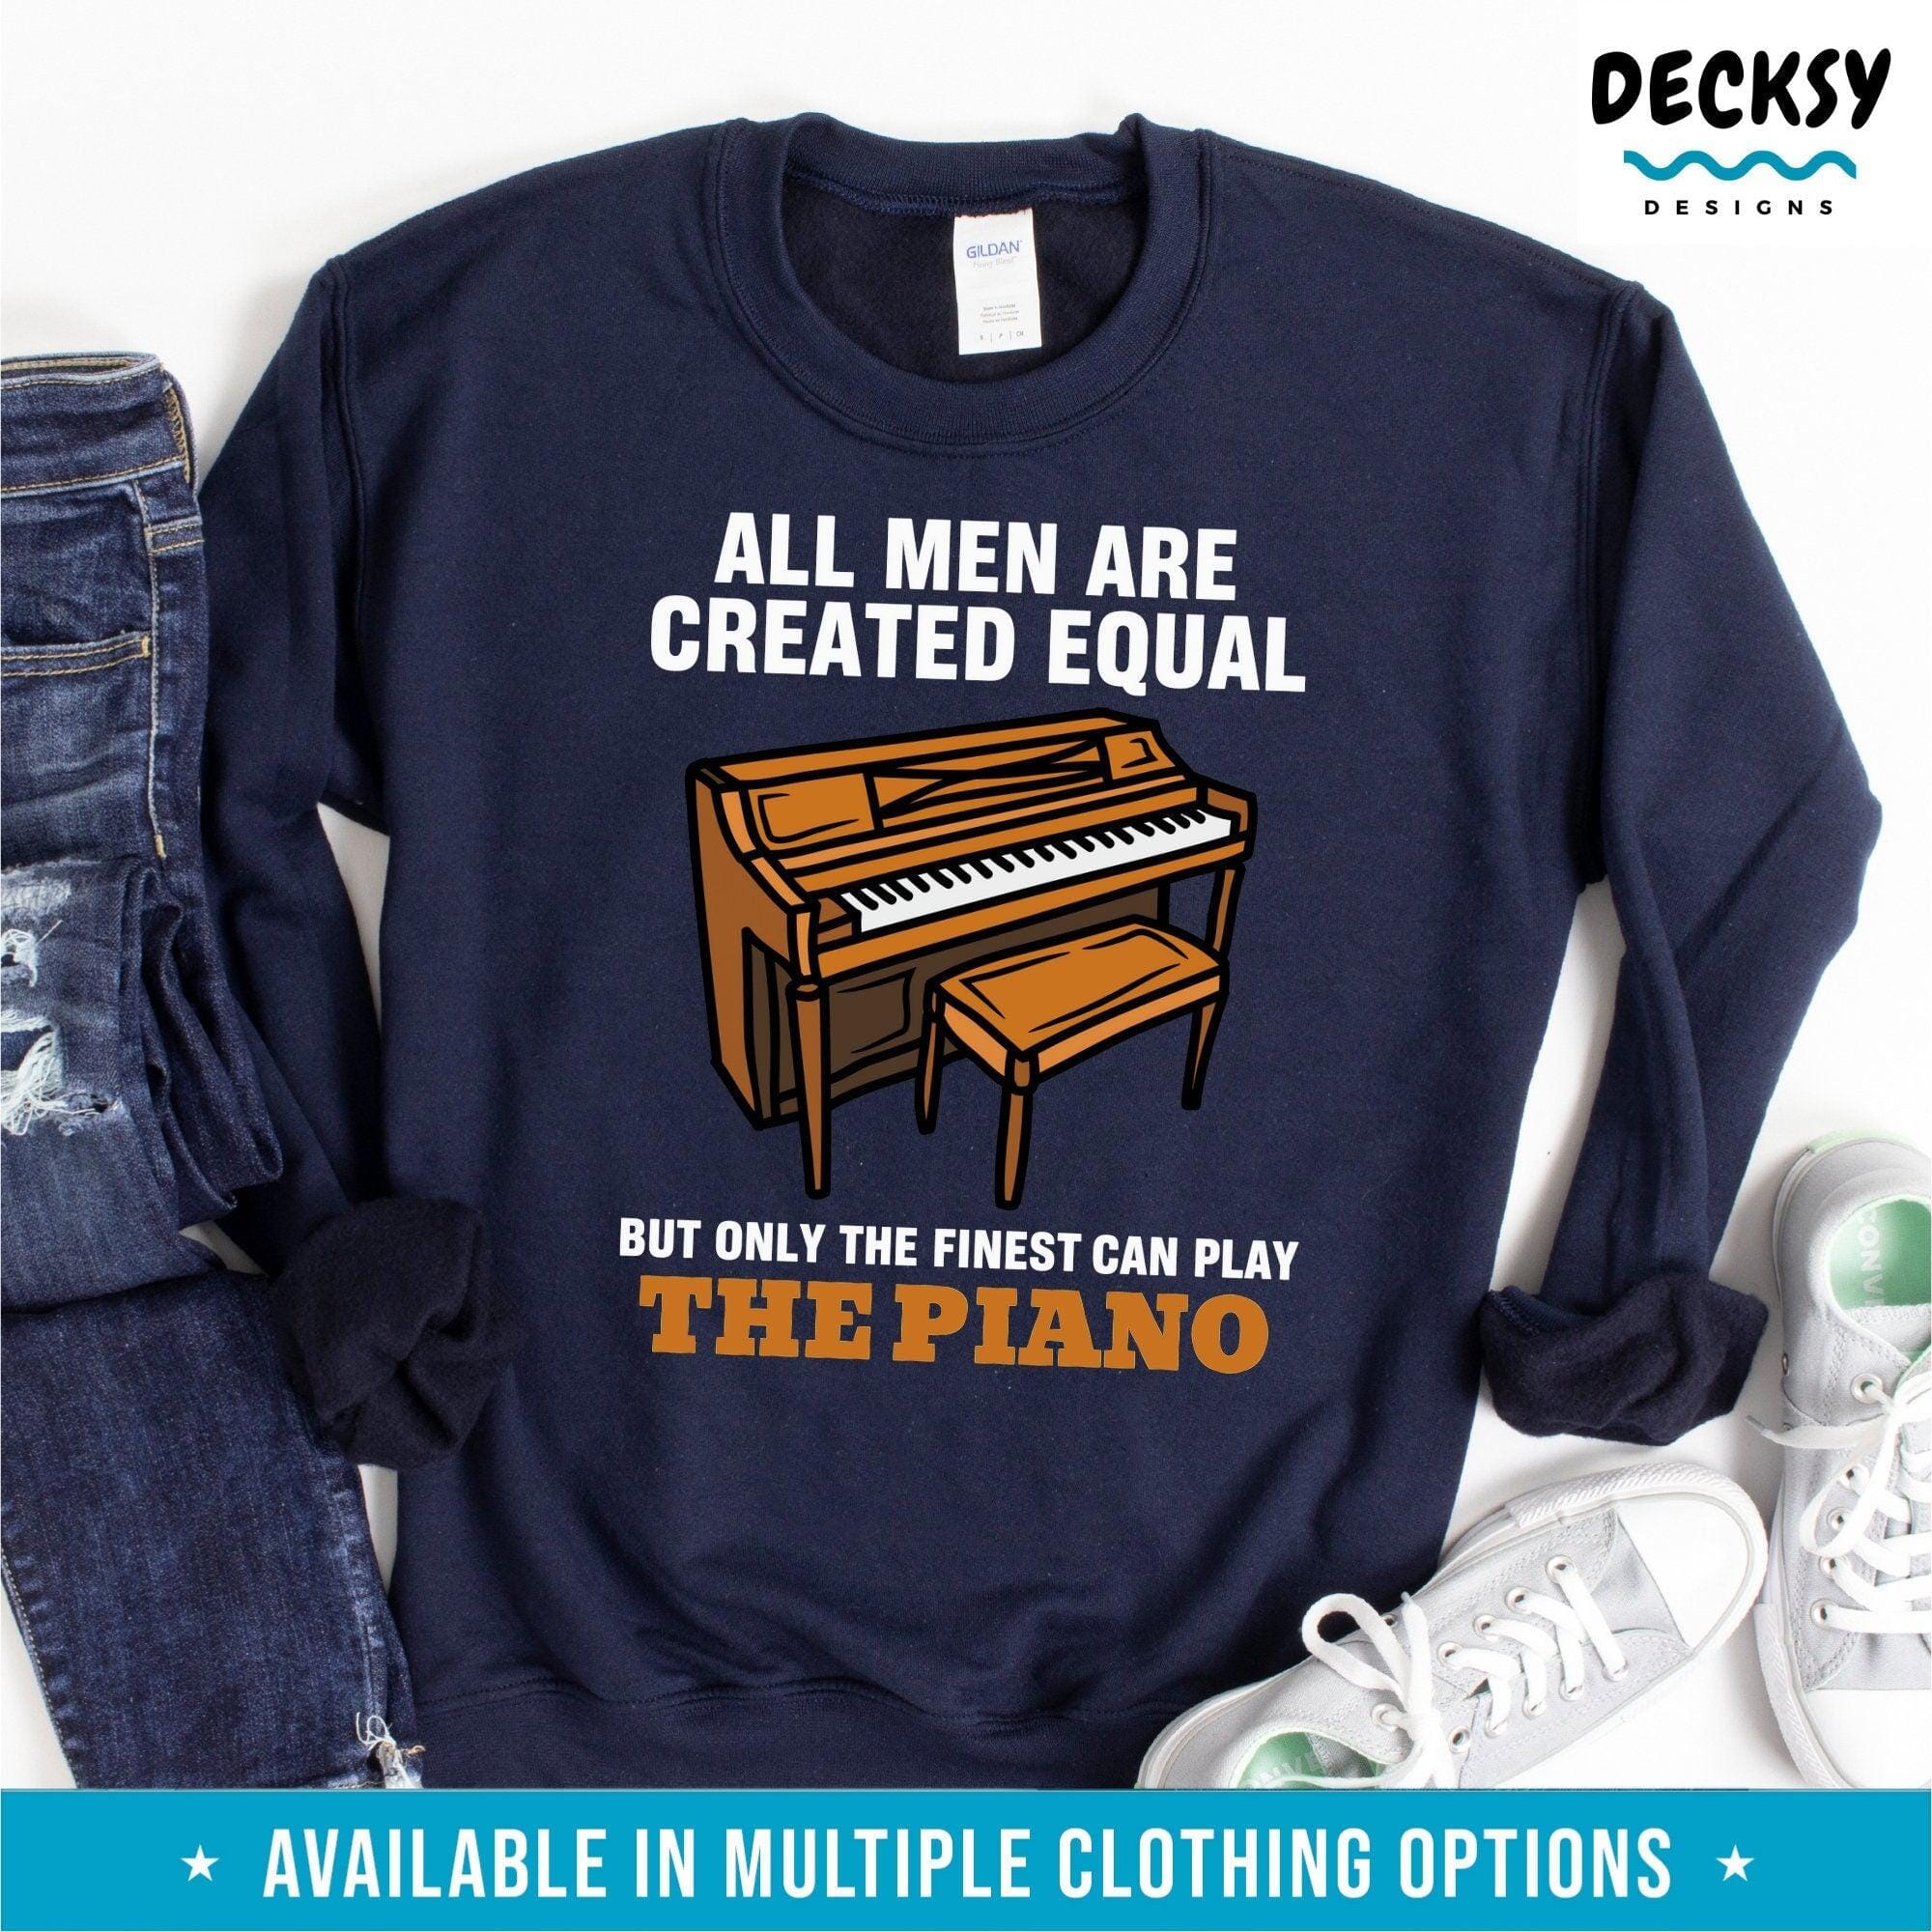 Piano Teacher Shirt, Pianist Gift For Him-Clothing:Gender-Neutral Adult Clothing:Tops & Tees:T-shirts:Graphic Tees-DecksyDesigns